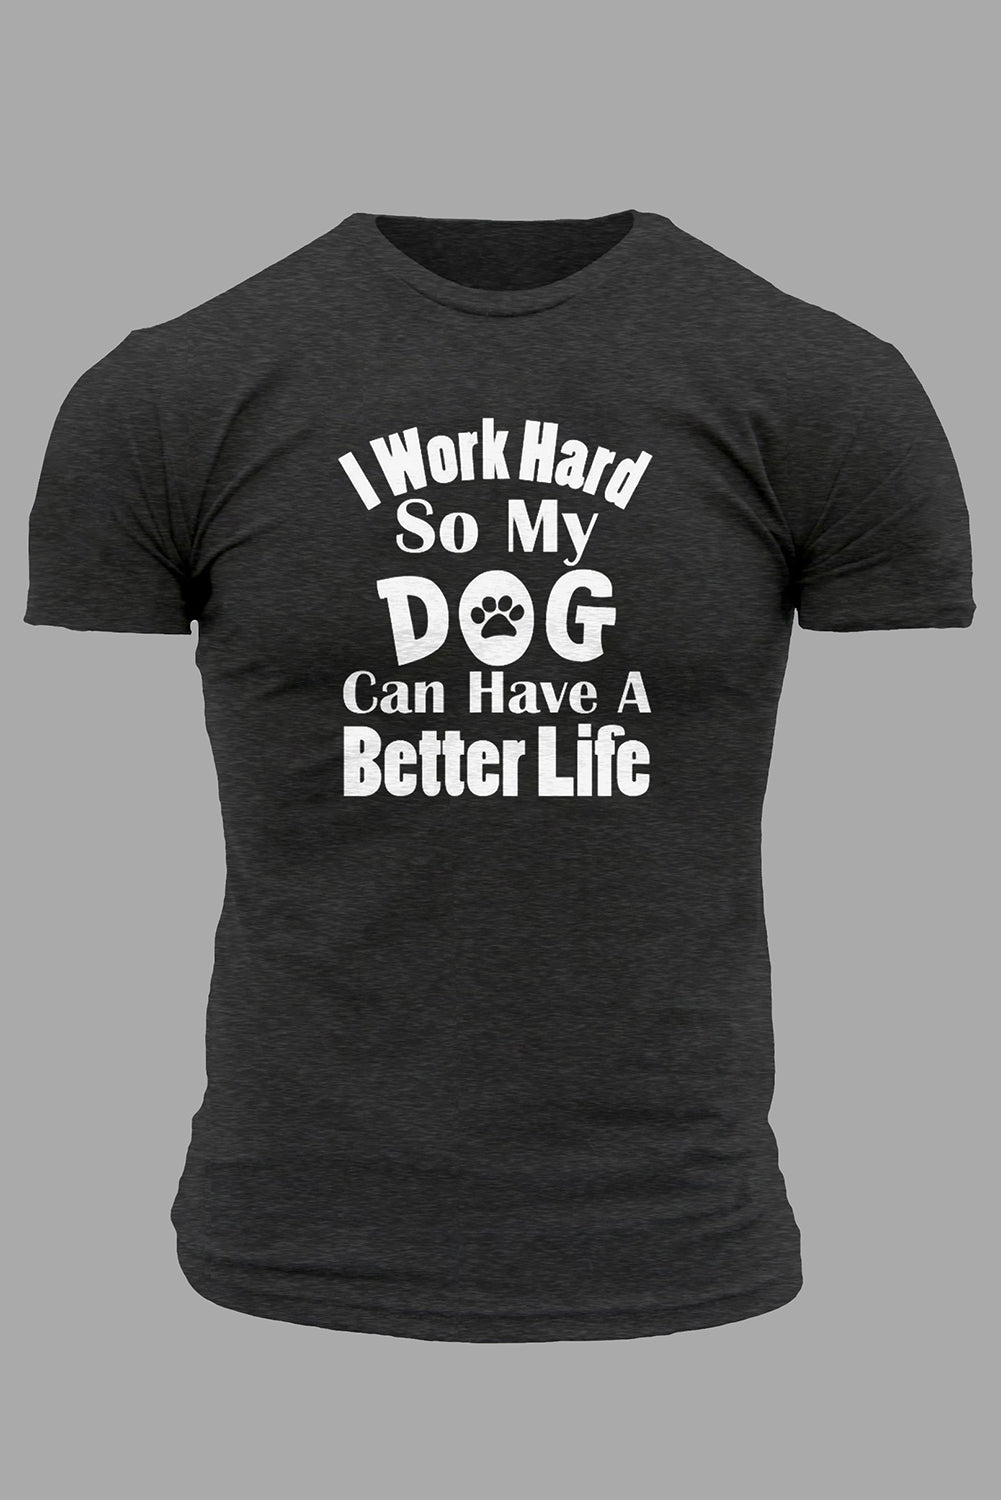 Gray I Work Hard So My Dog Can Have A Better Life T Shirt Gray 62%Polyester+32%Cotton+6%Elastane Men's Tops JT's Designer Fashion